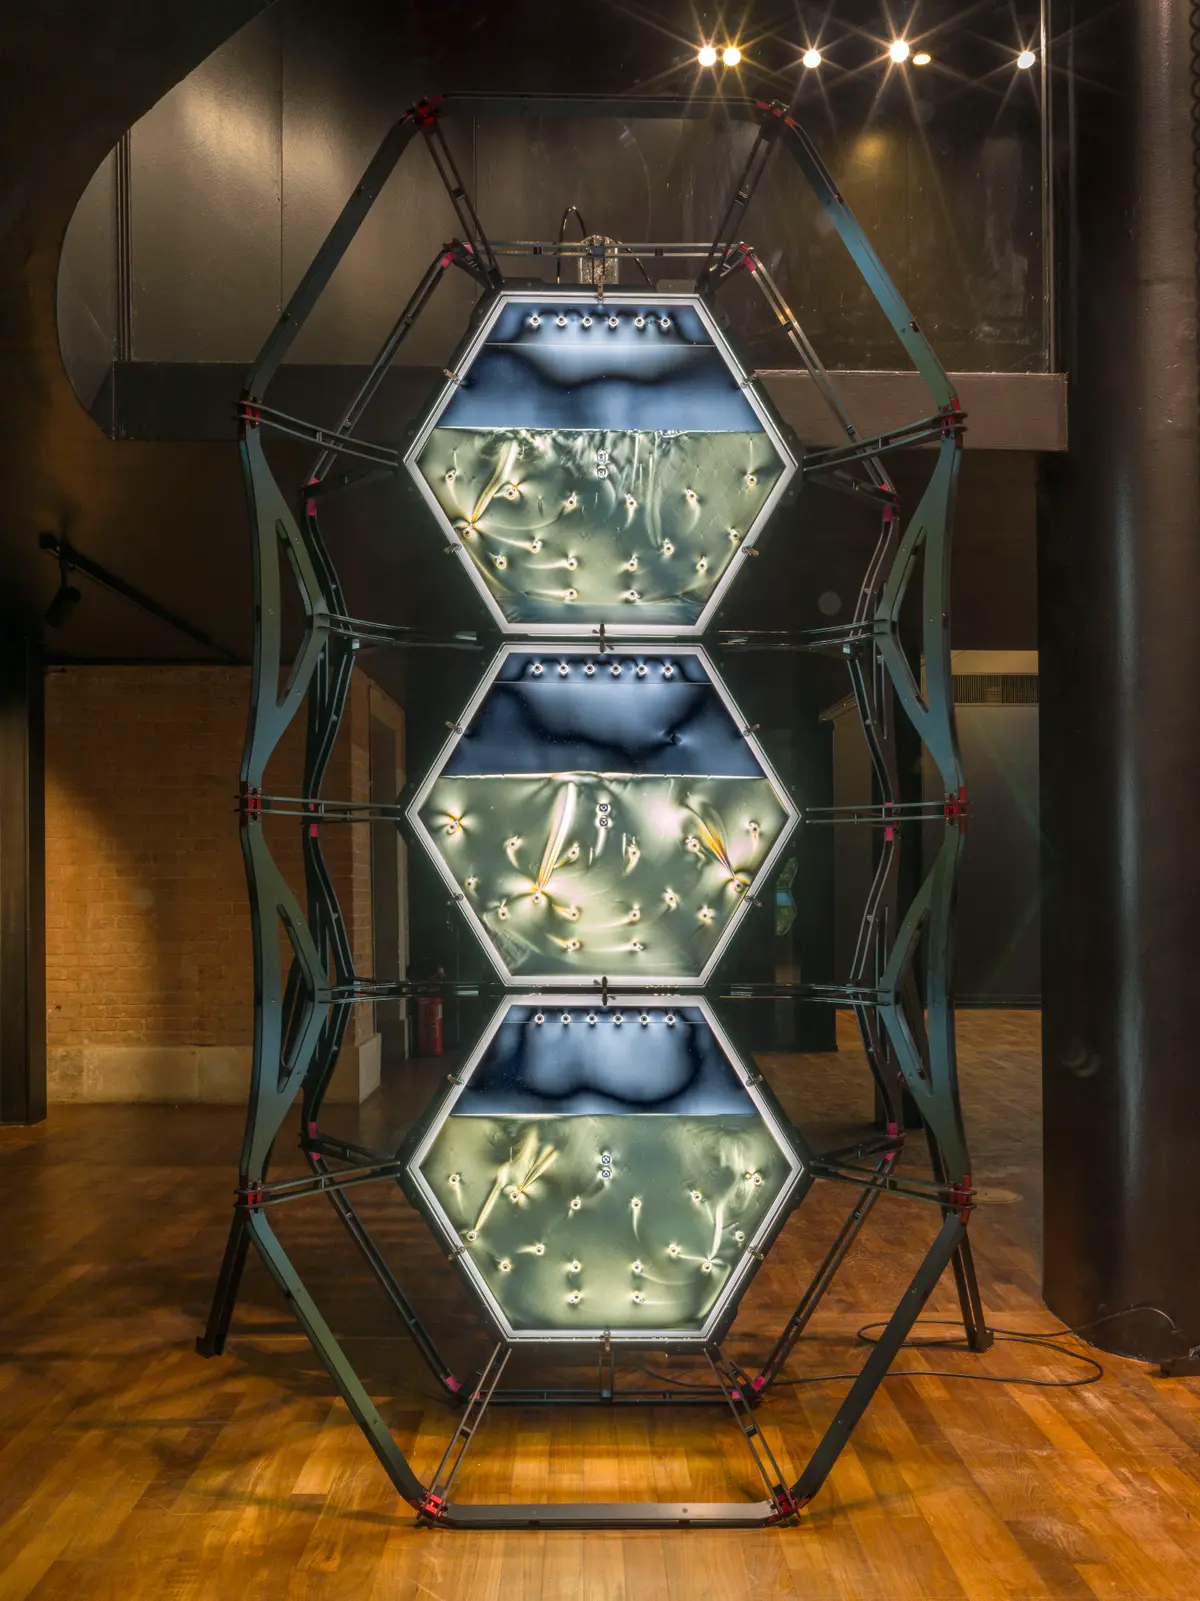 An industrial metallic installation consisting of three vertically stacked blue-lit hexagon shapes, resembling semi-filled aquariums, displayed under visual effect lighting.